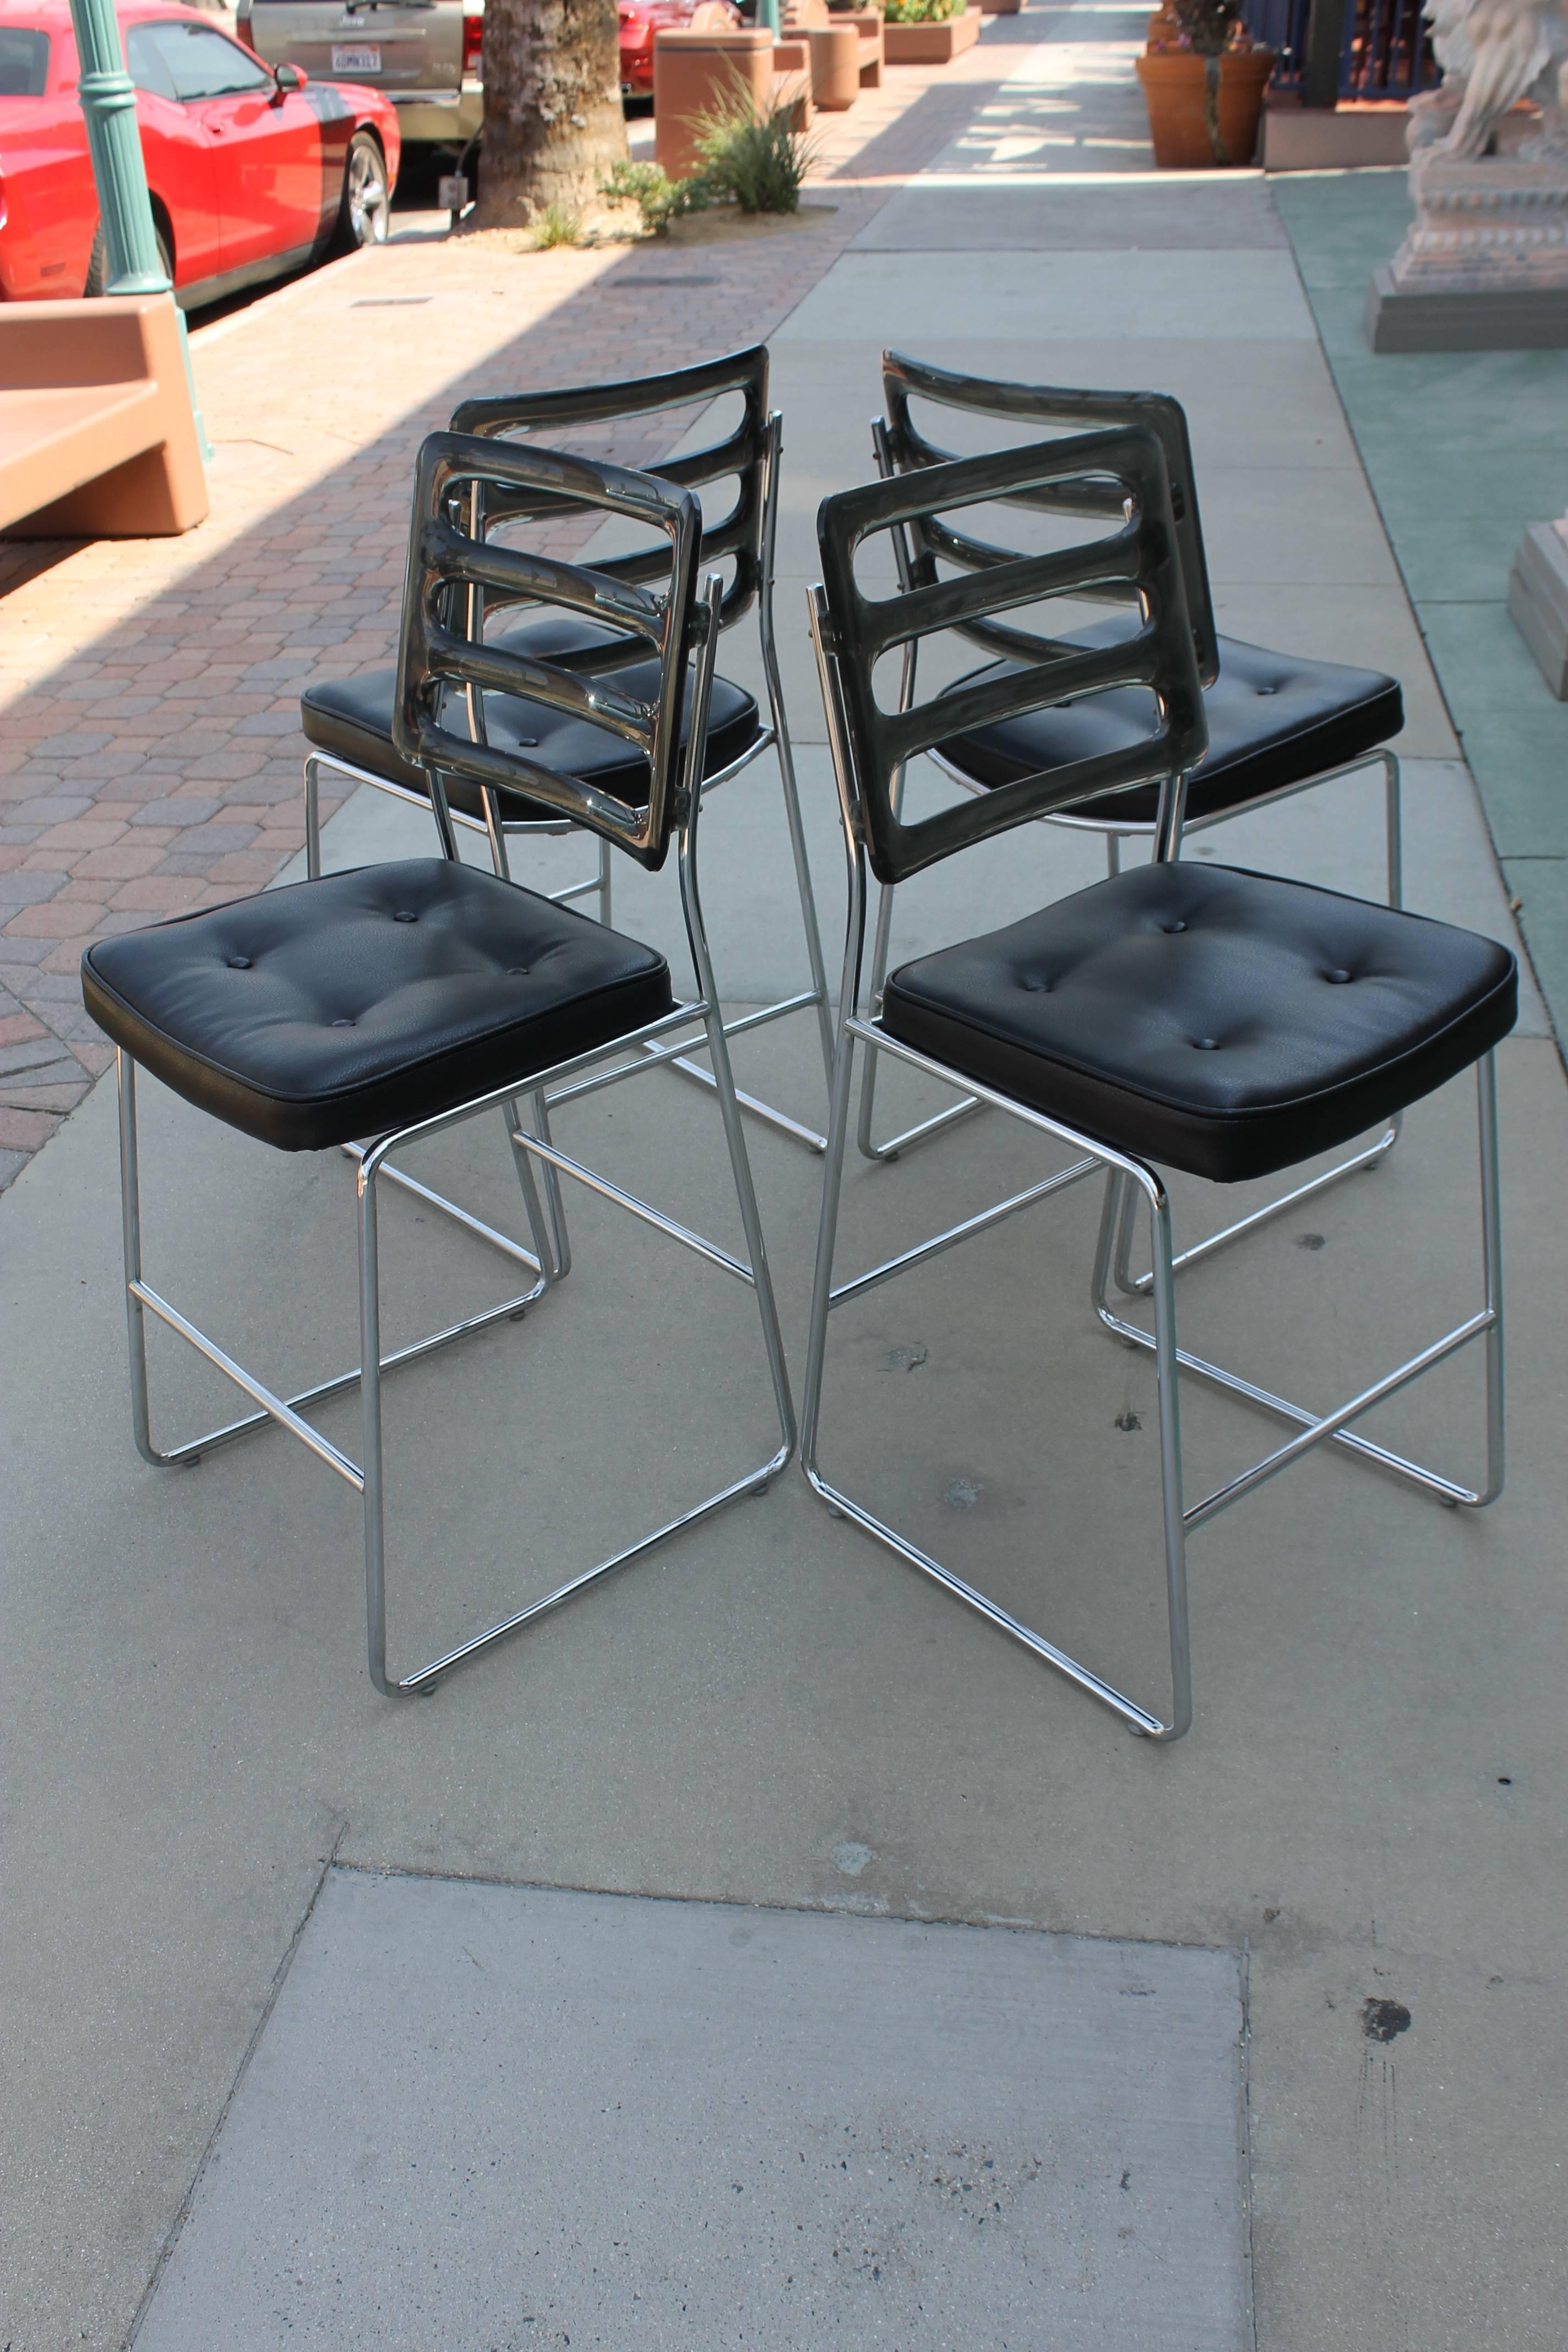 Four matching bar stools by Chromcraft, with cast acrylic seat backs and chromed steel frames. Seats are newly reupholstered in black faux leather. Cast acrylic backs are clear smoke color. These measure 40